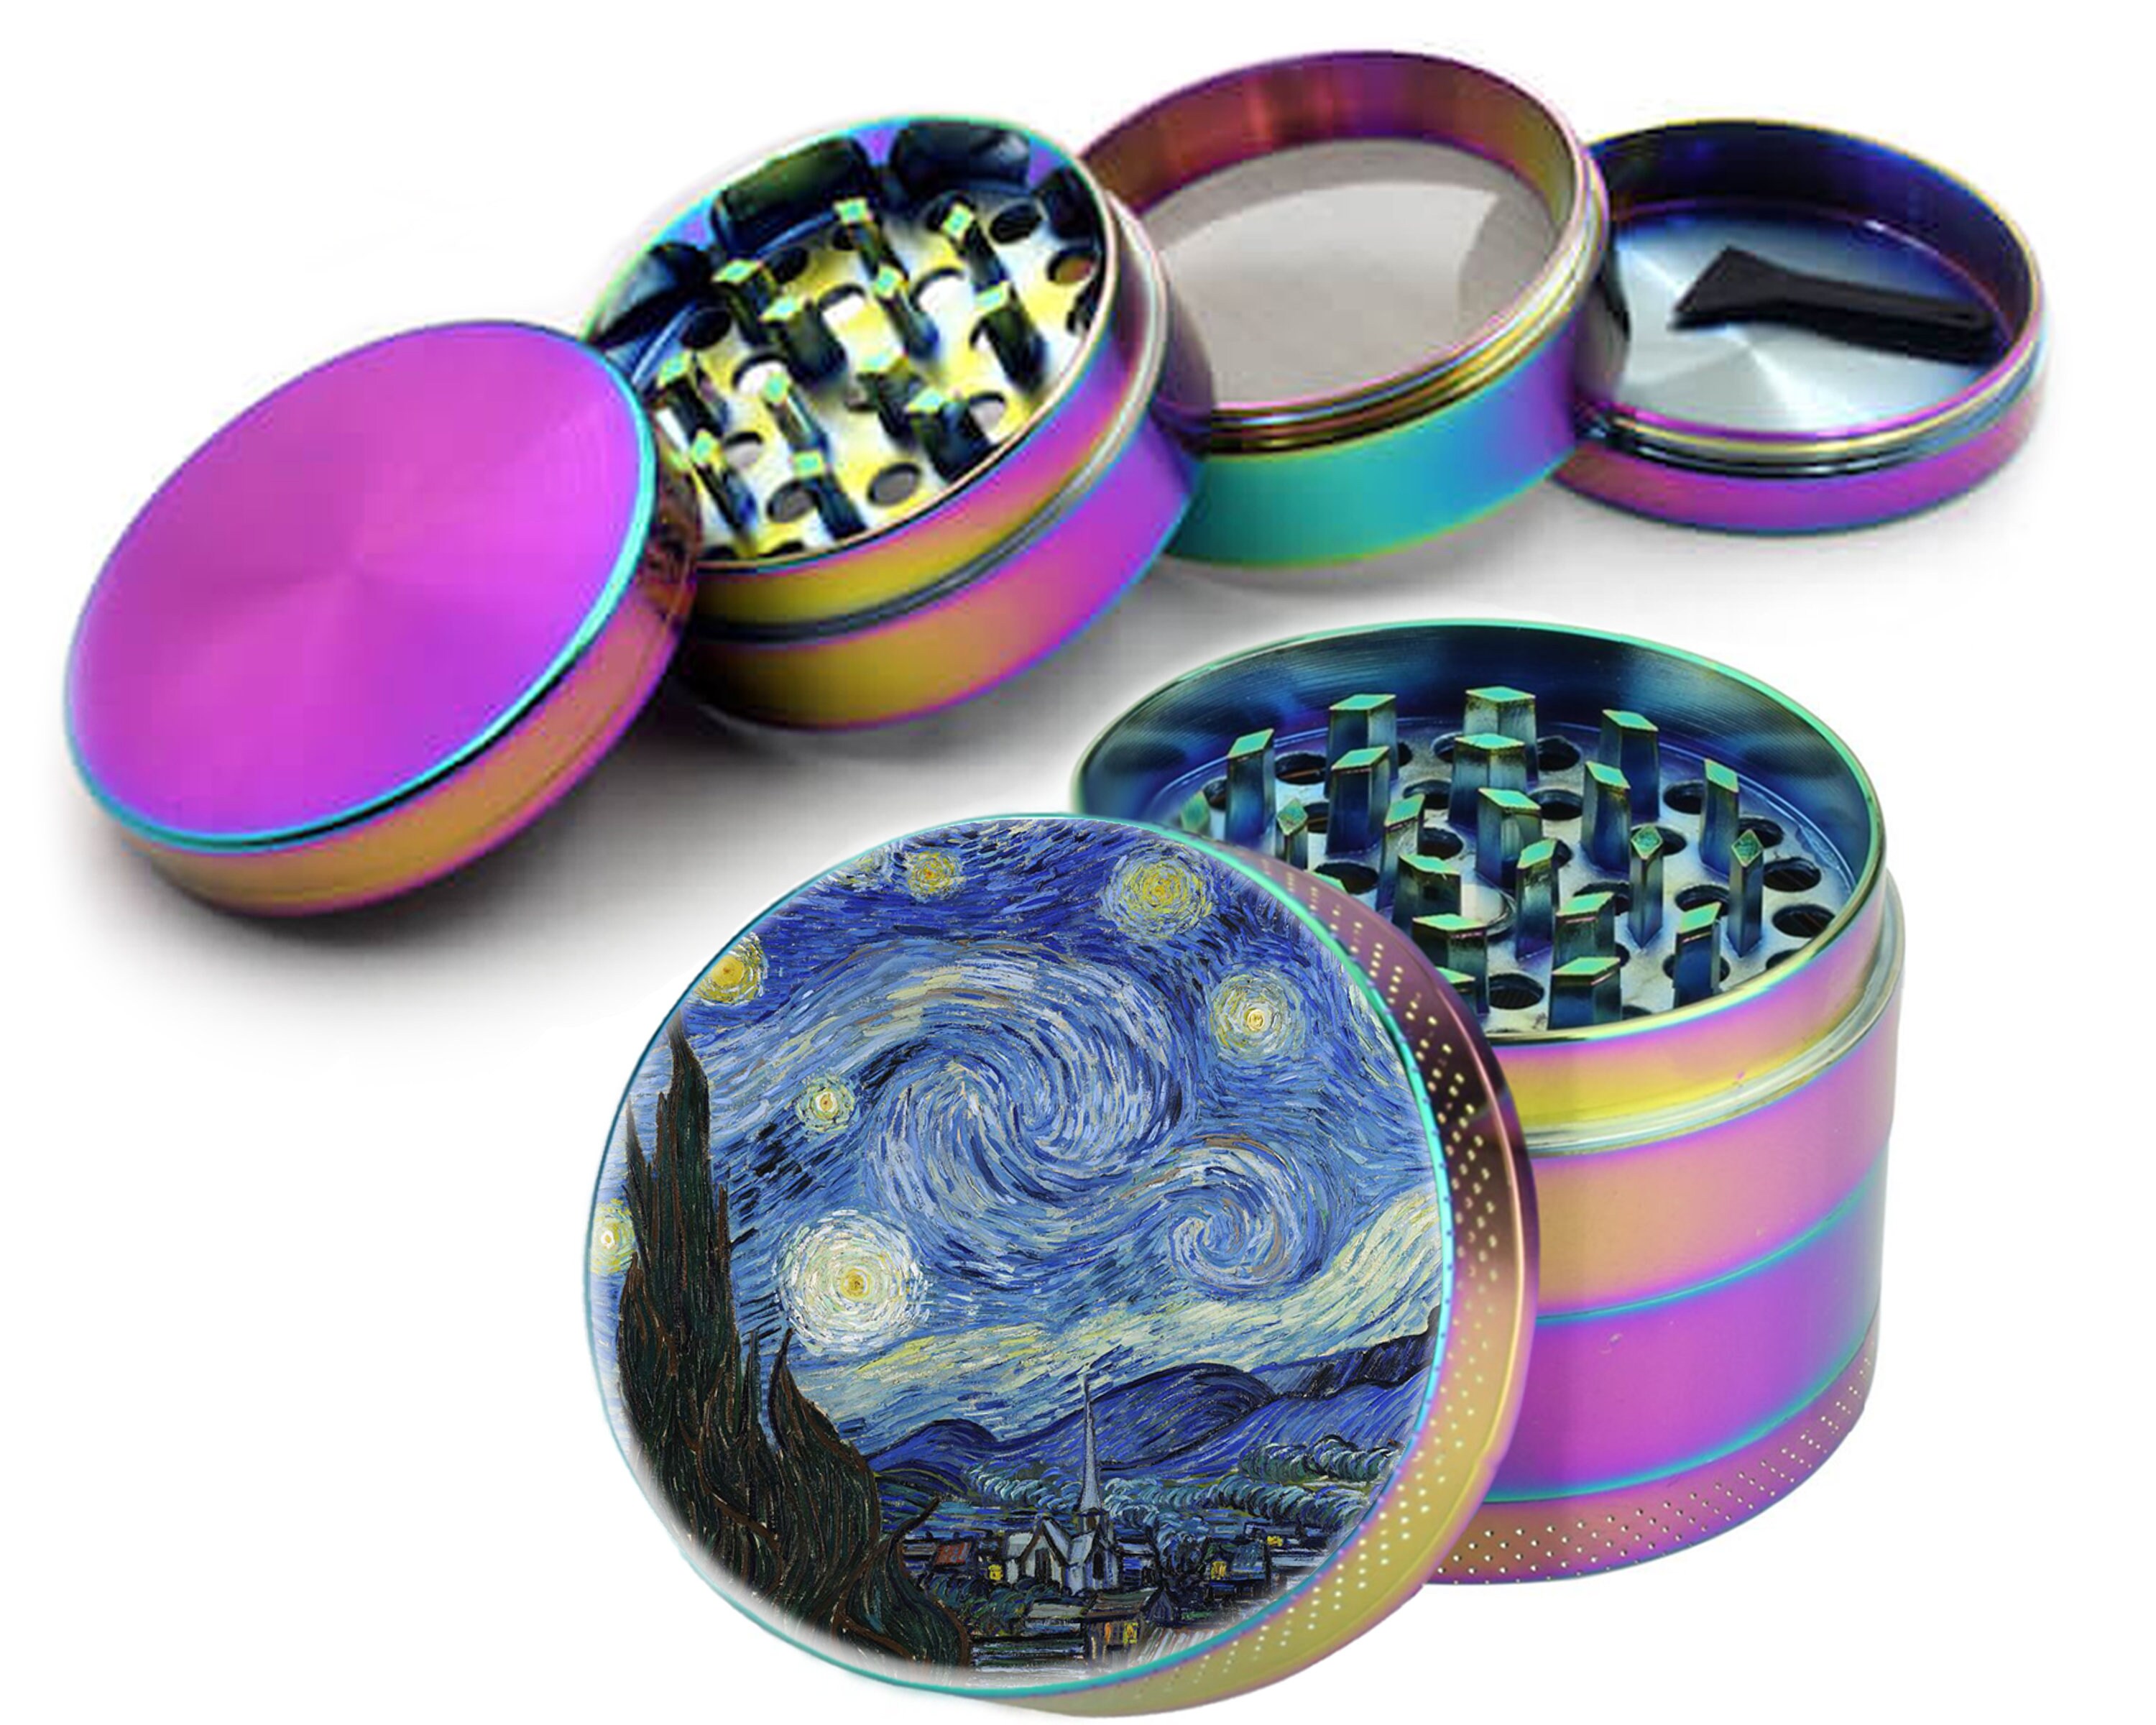 Galaxy Colored Spiral Glass Blunt + Free Psychedelic Grinder – EQcreative  Plus